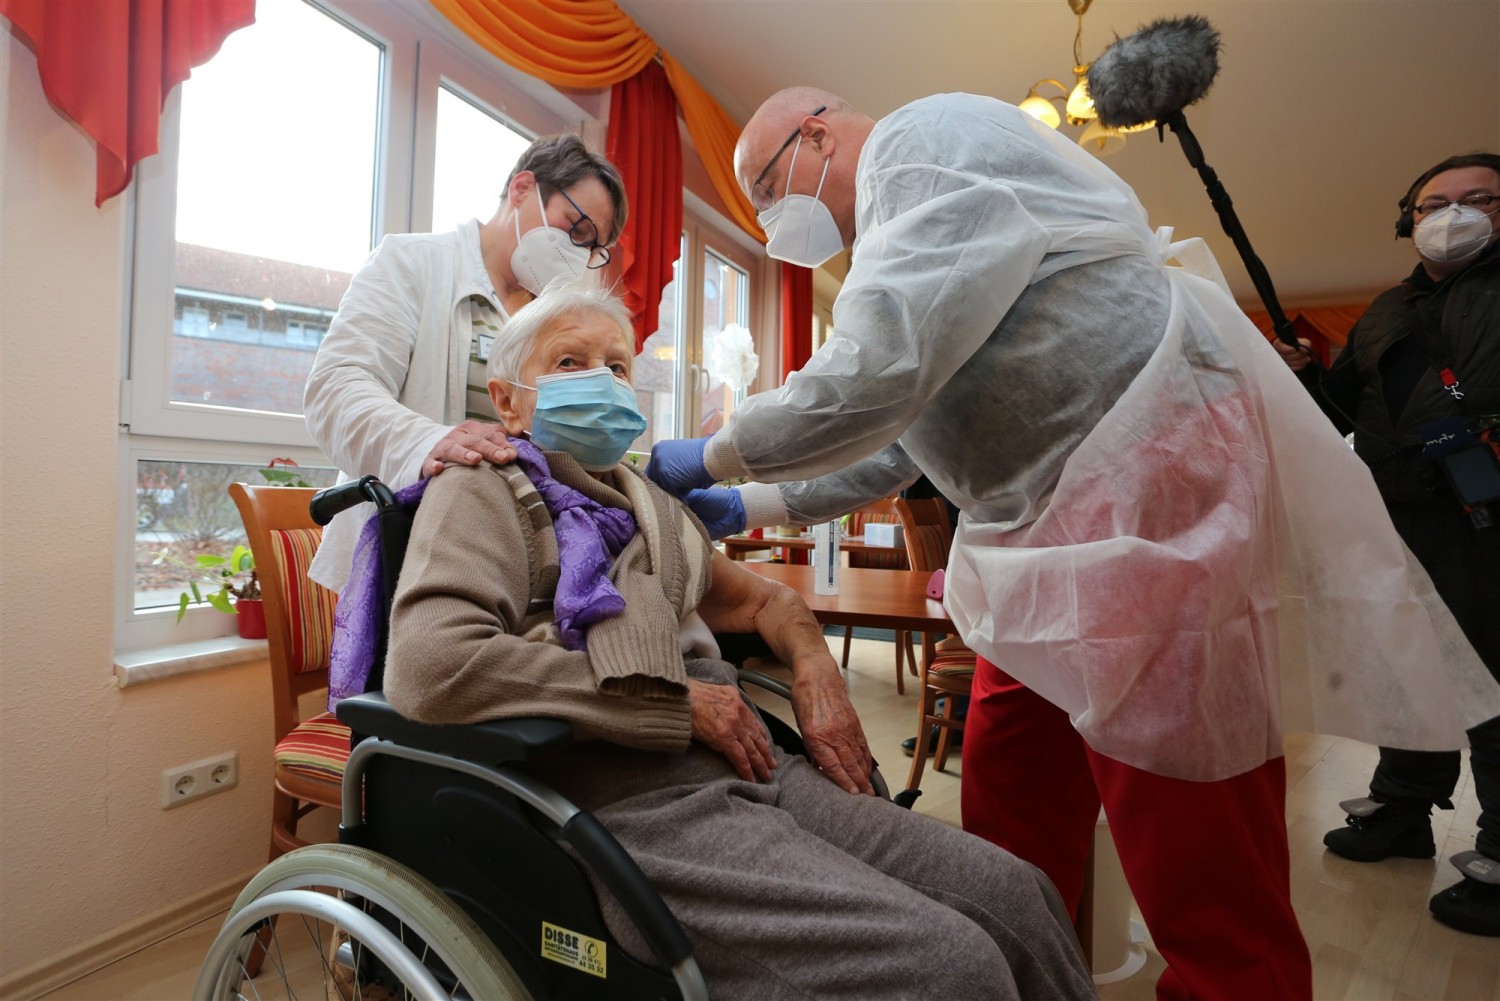 Nursing home resident Edith Kwoizalla, age 101, became the first person in Germany to receive the Covid-19 vaccine. Matthias Bein / AP